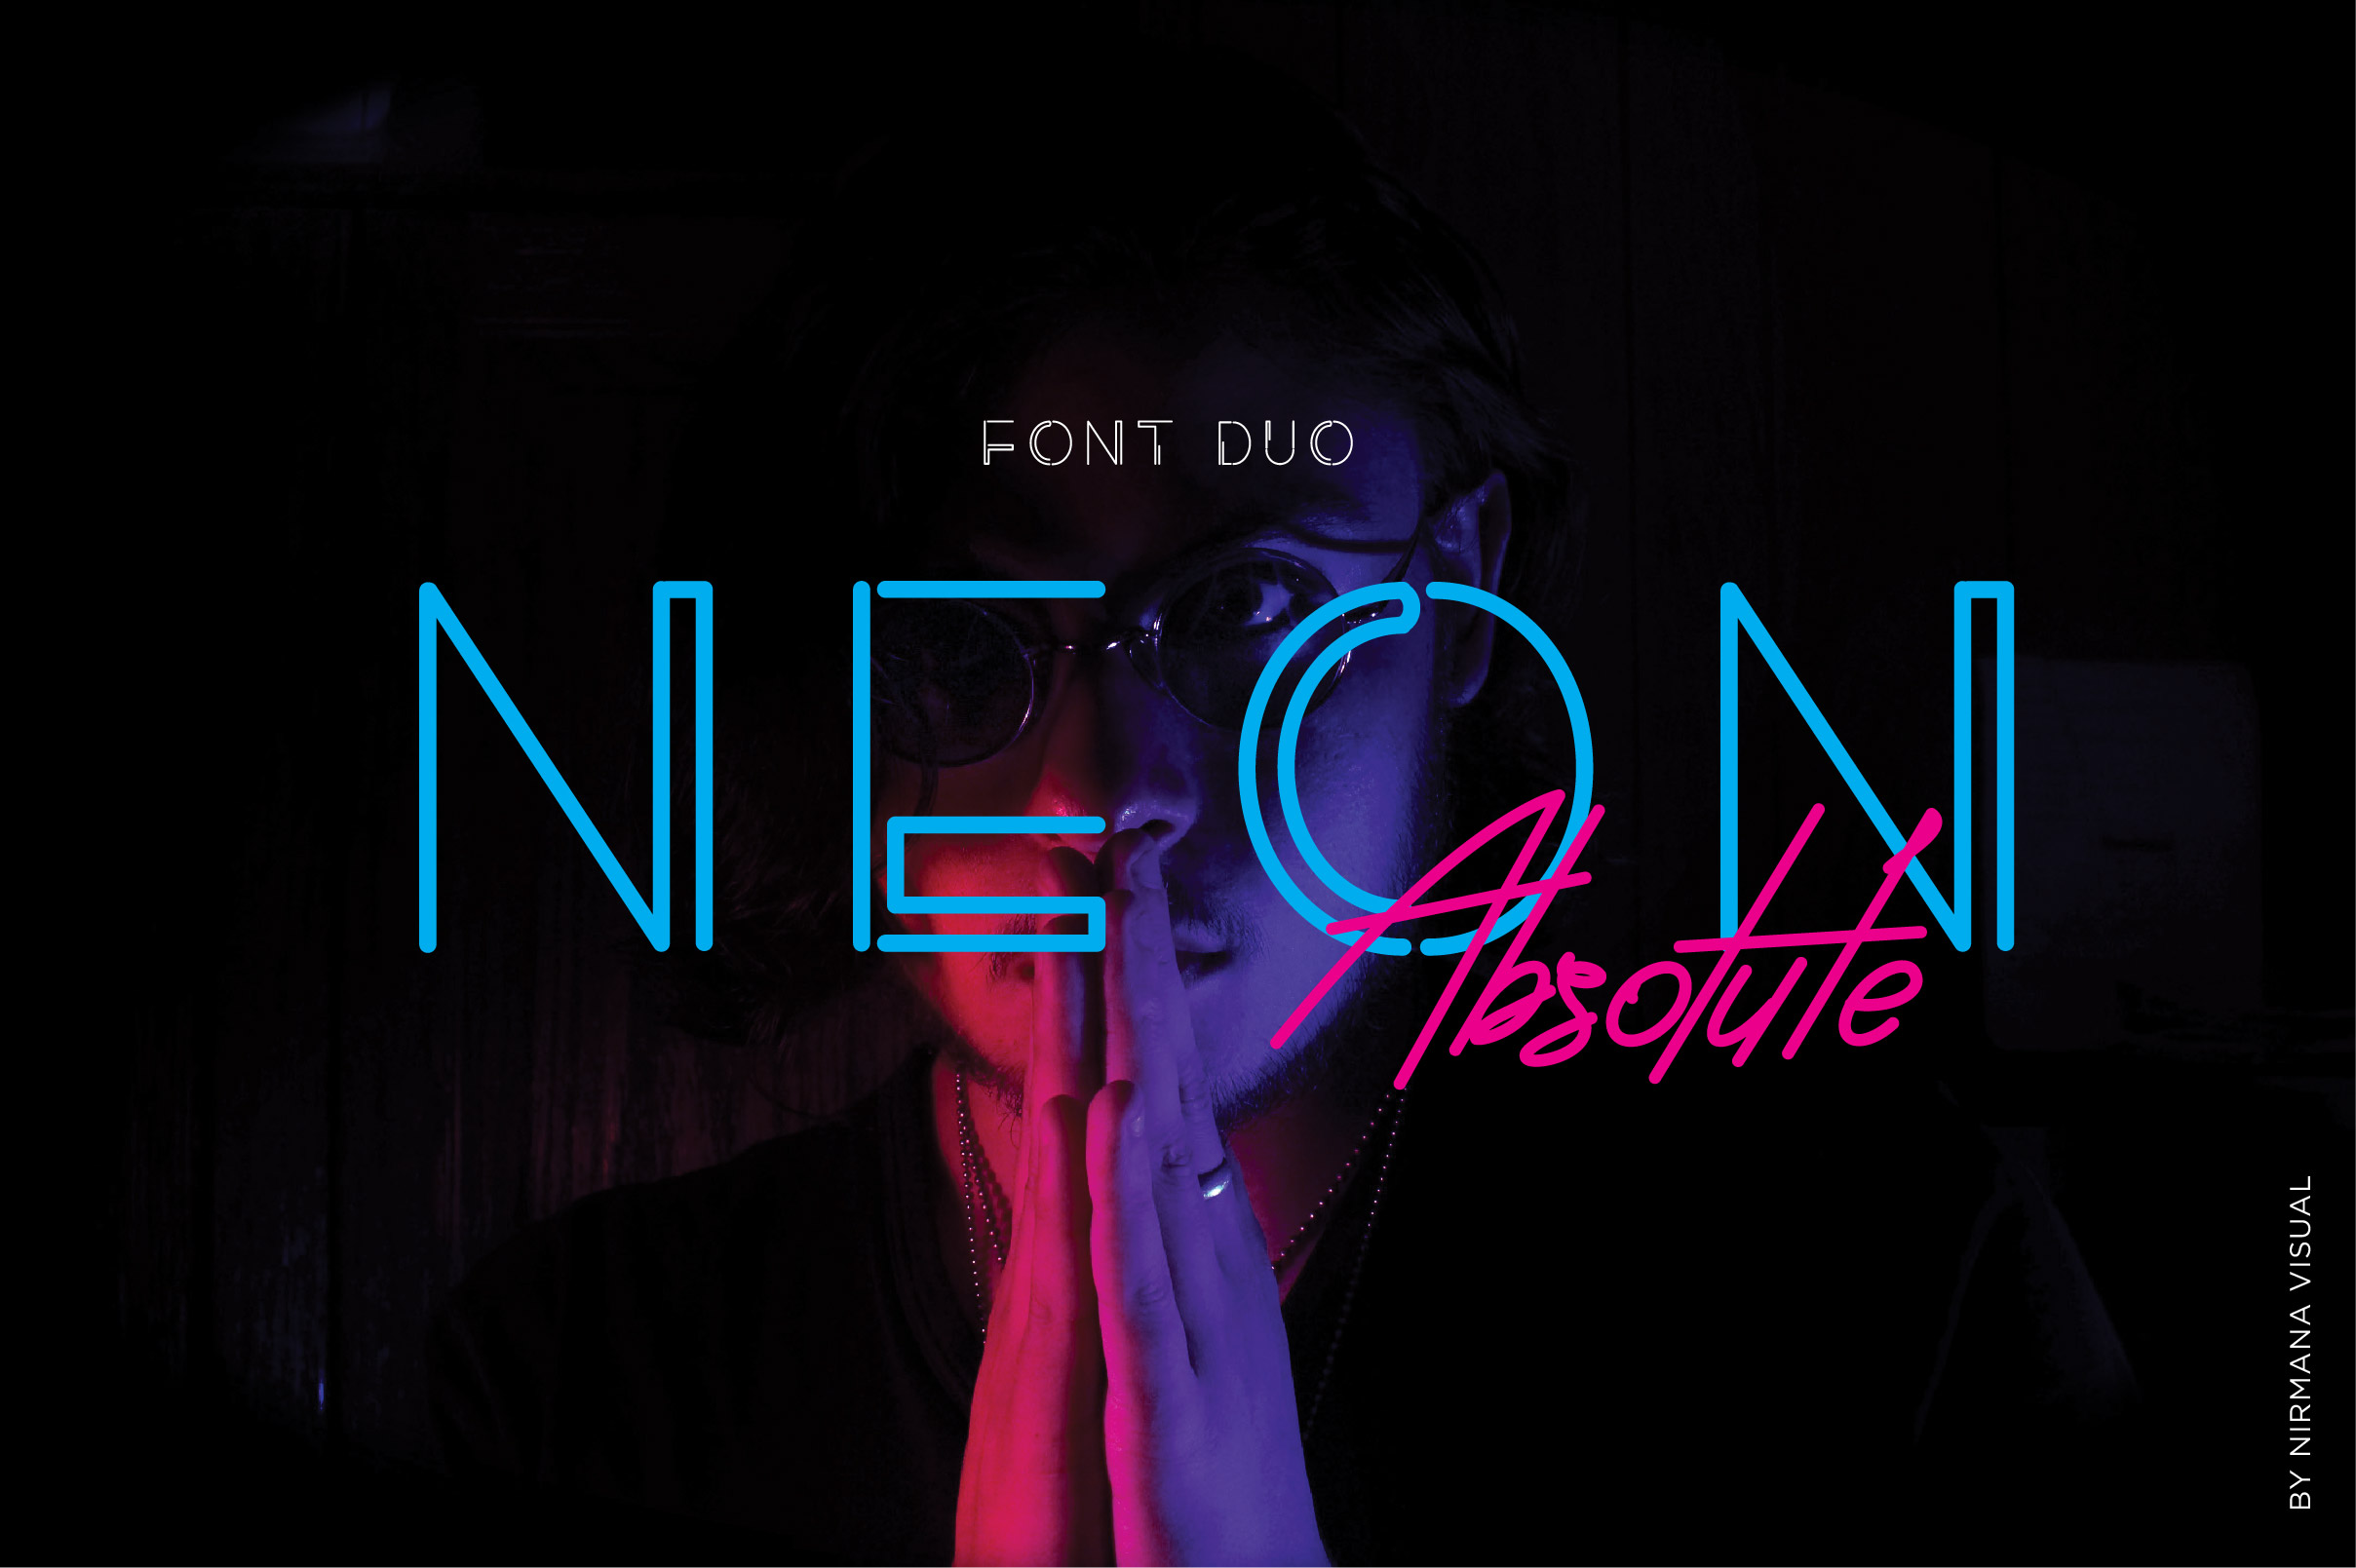 Neon Absolute Free Font